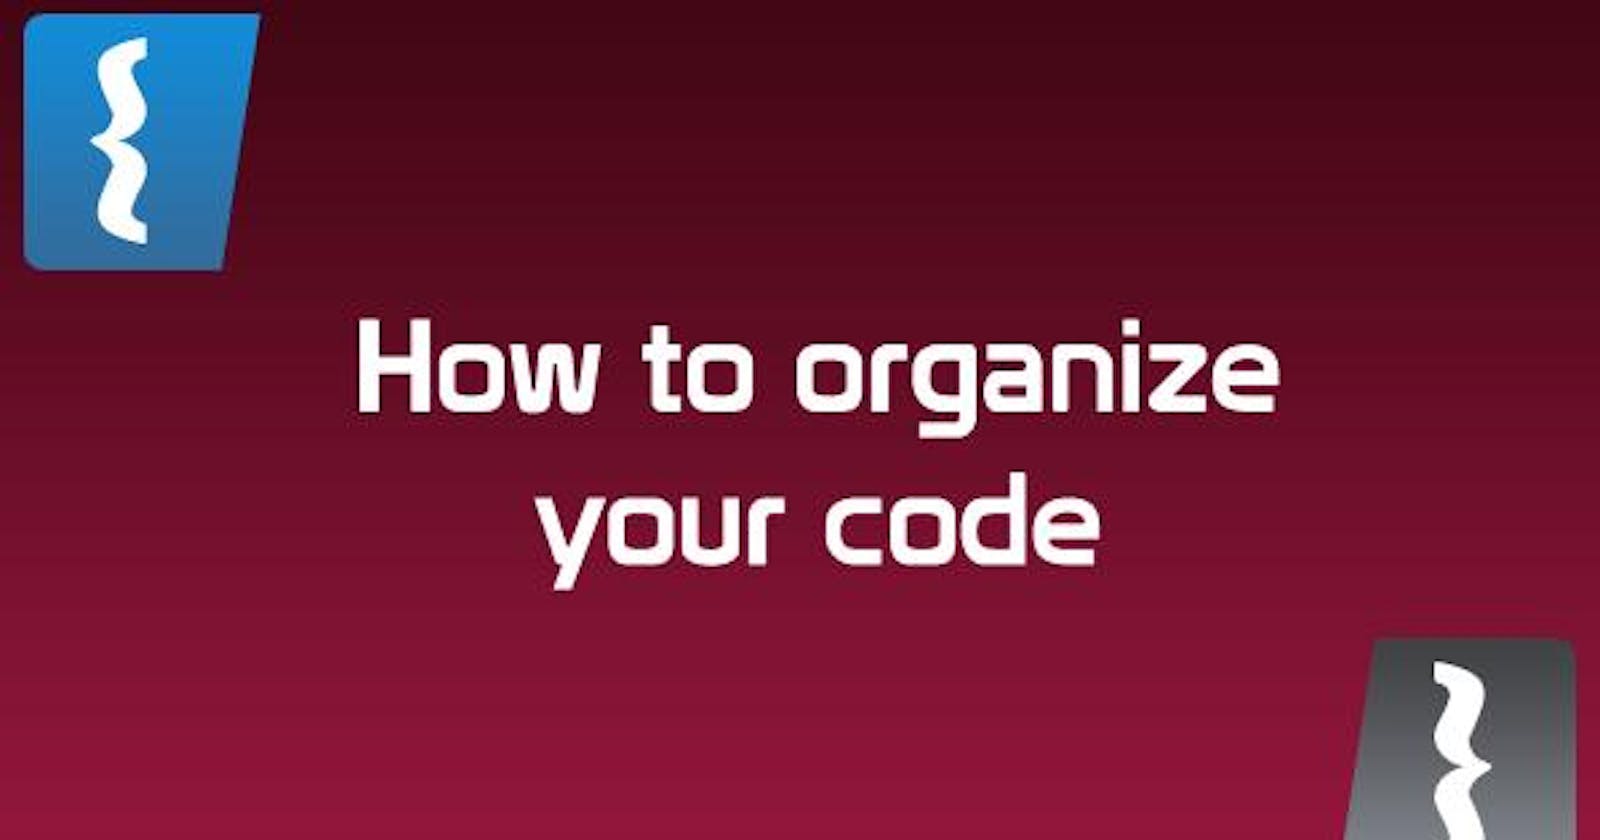 You won't find your code if you don't organize it properly! Here is how I do it.